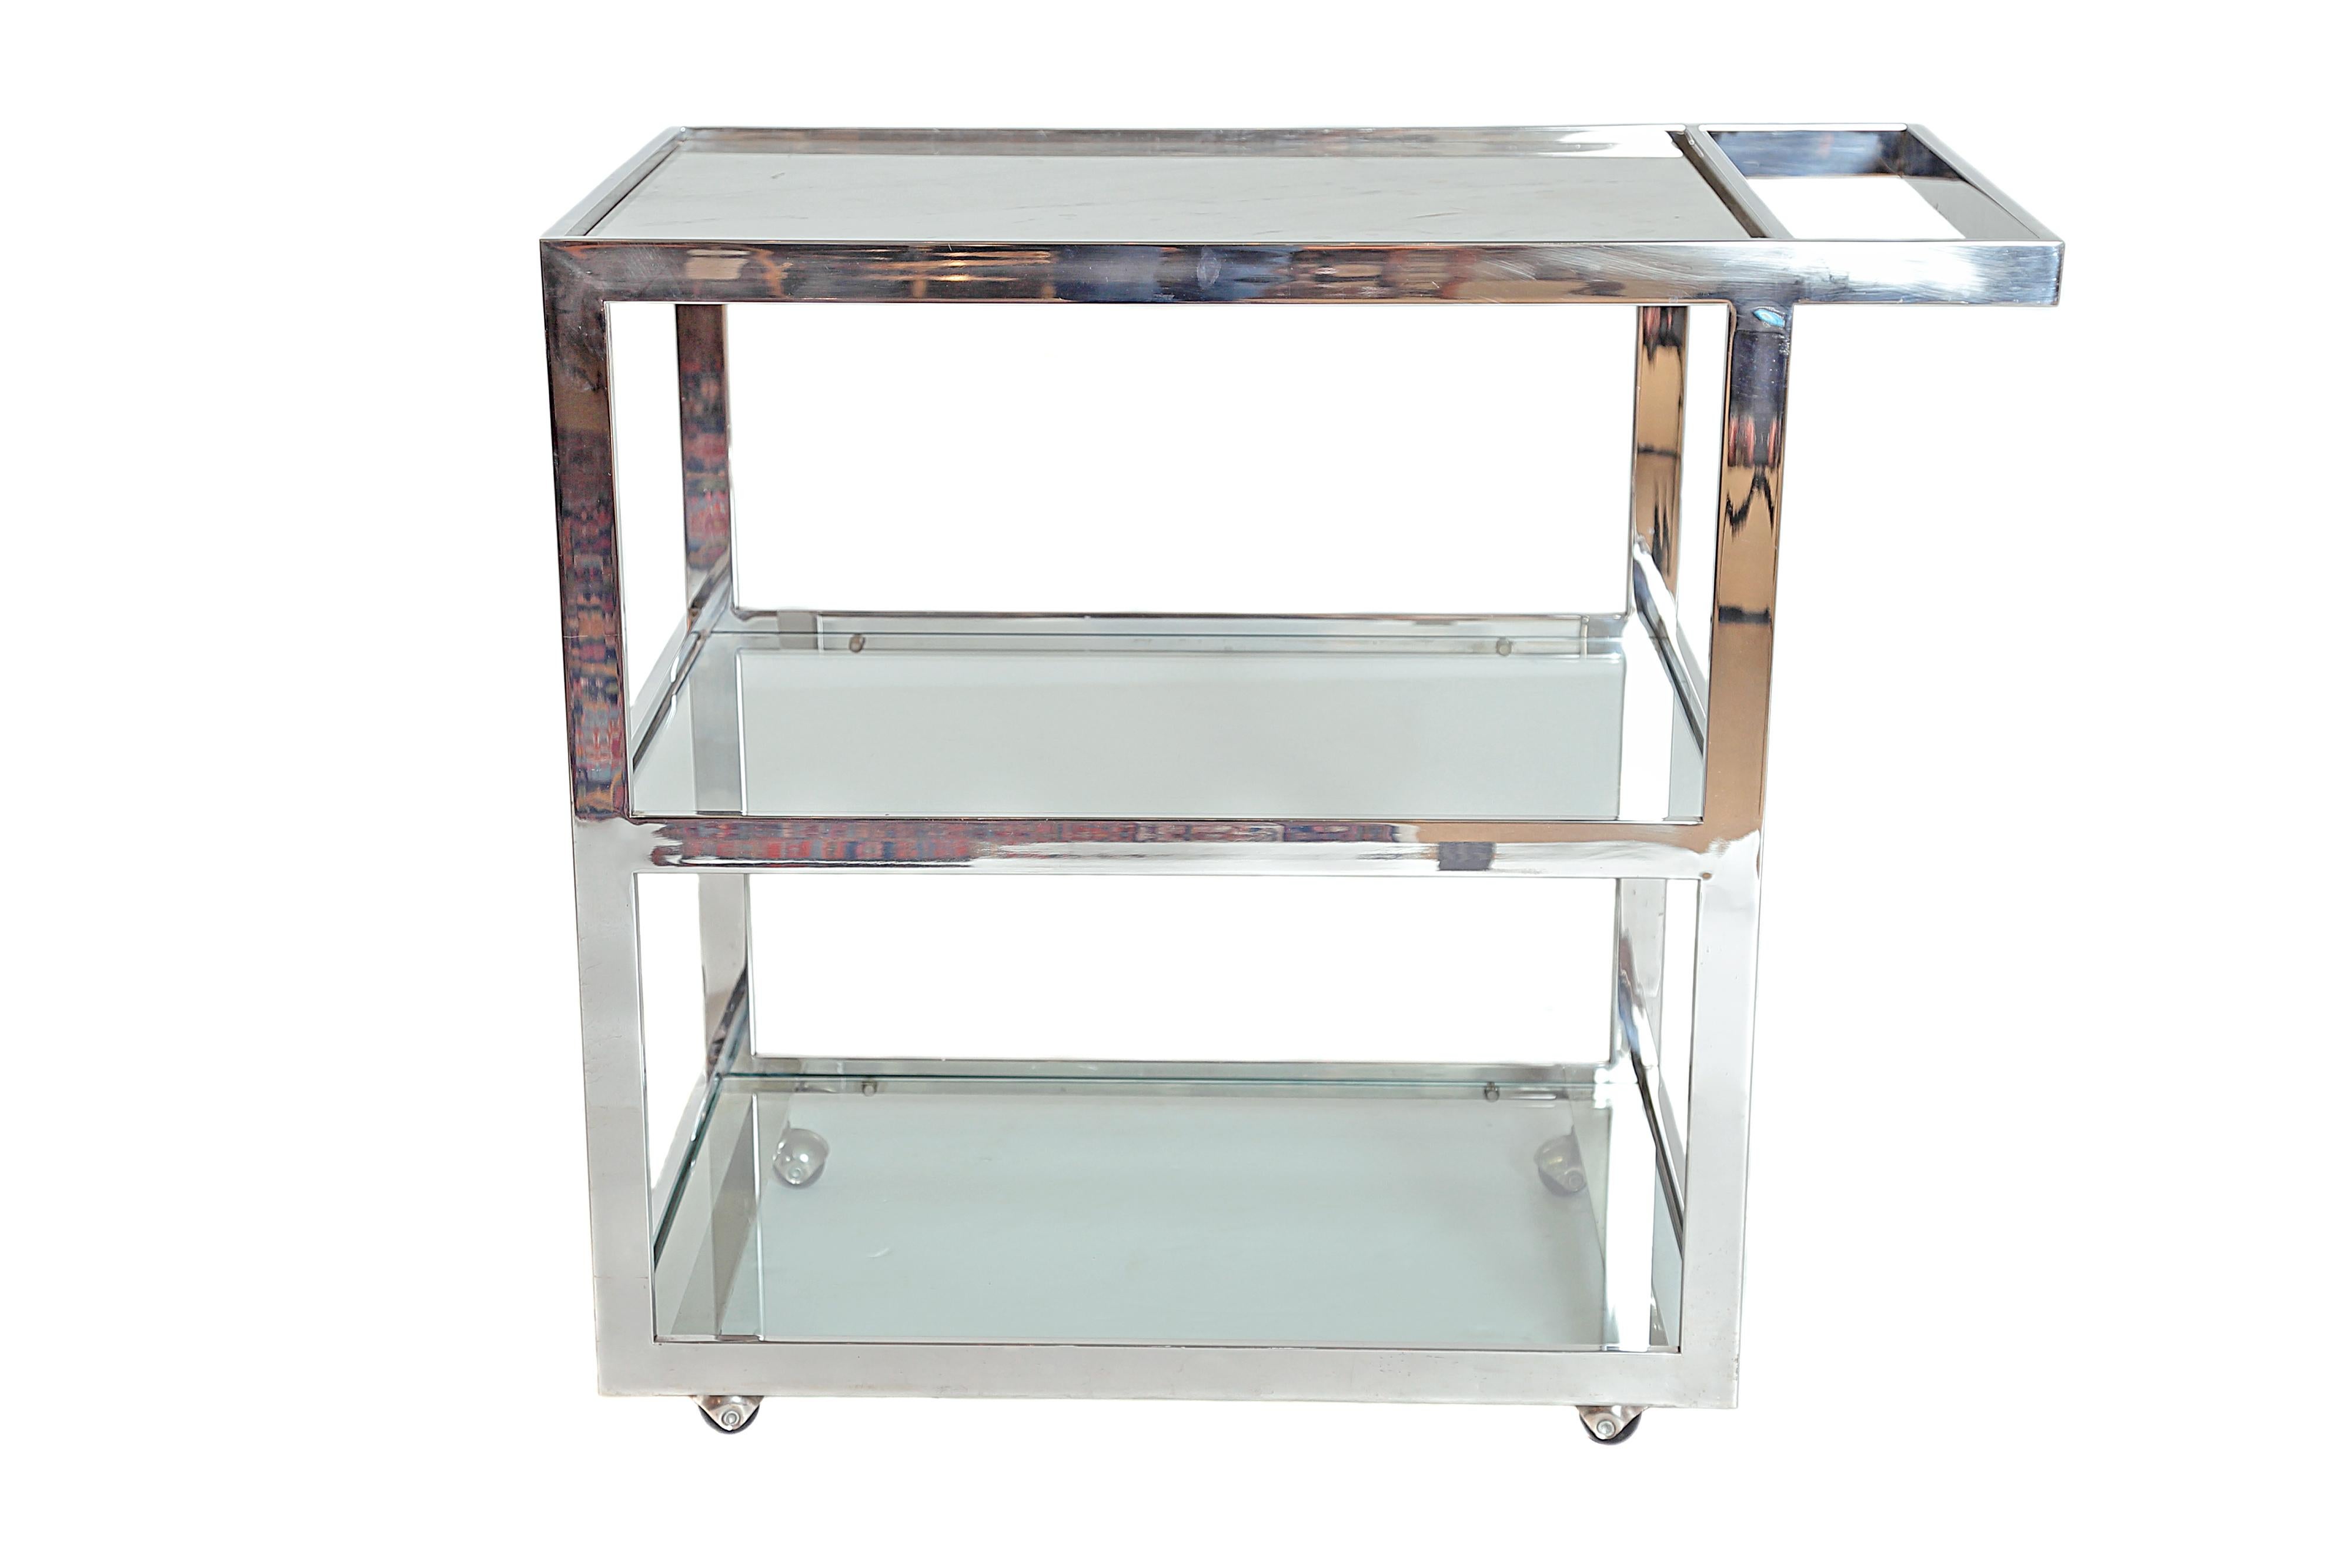 Vintage chrome, glass and Carrara marble, three-tiered drinks cart with handle, attributed to Milo Baughman, circa 1970s.